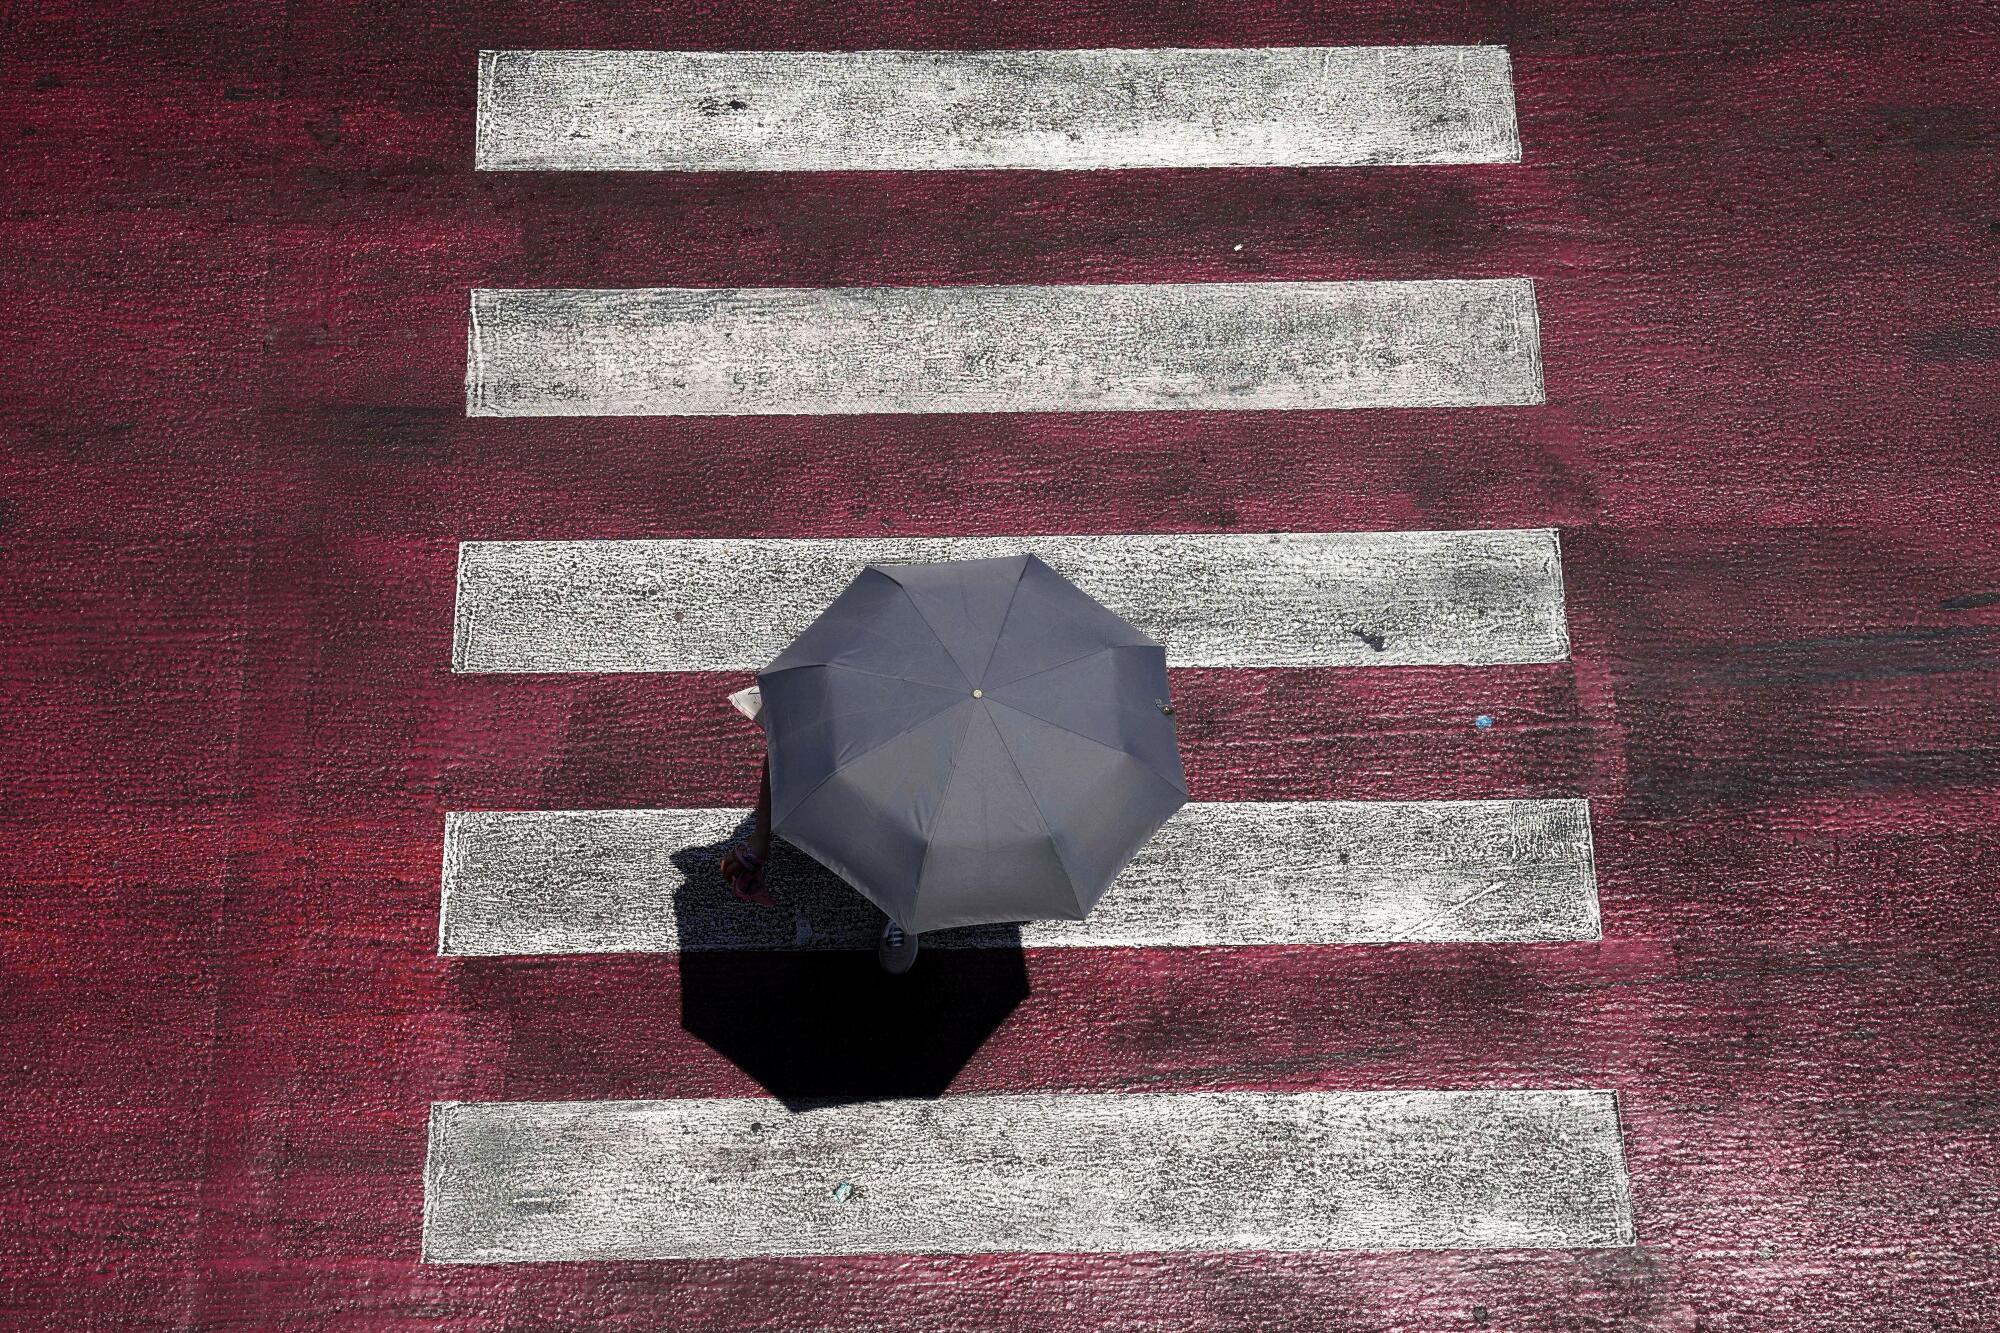 An aerial view of an open umbrella being held by a person in a crosswalk.